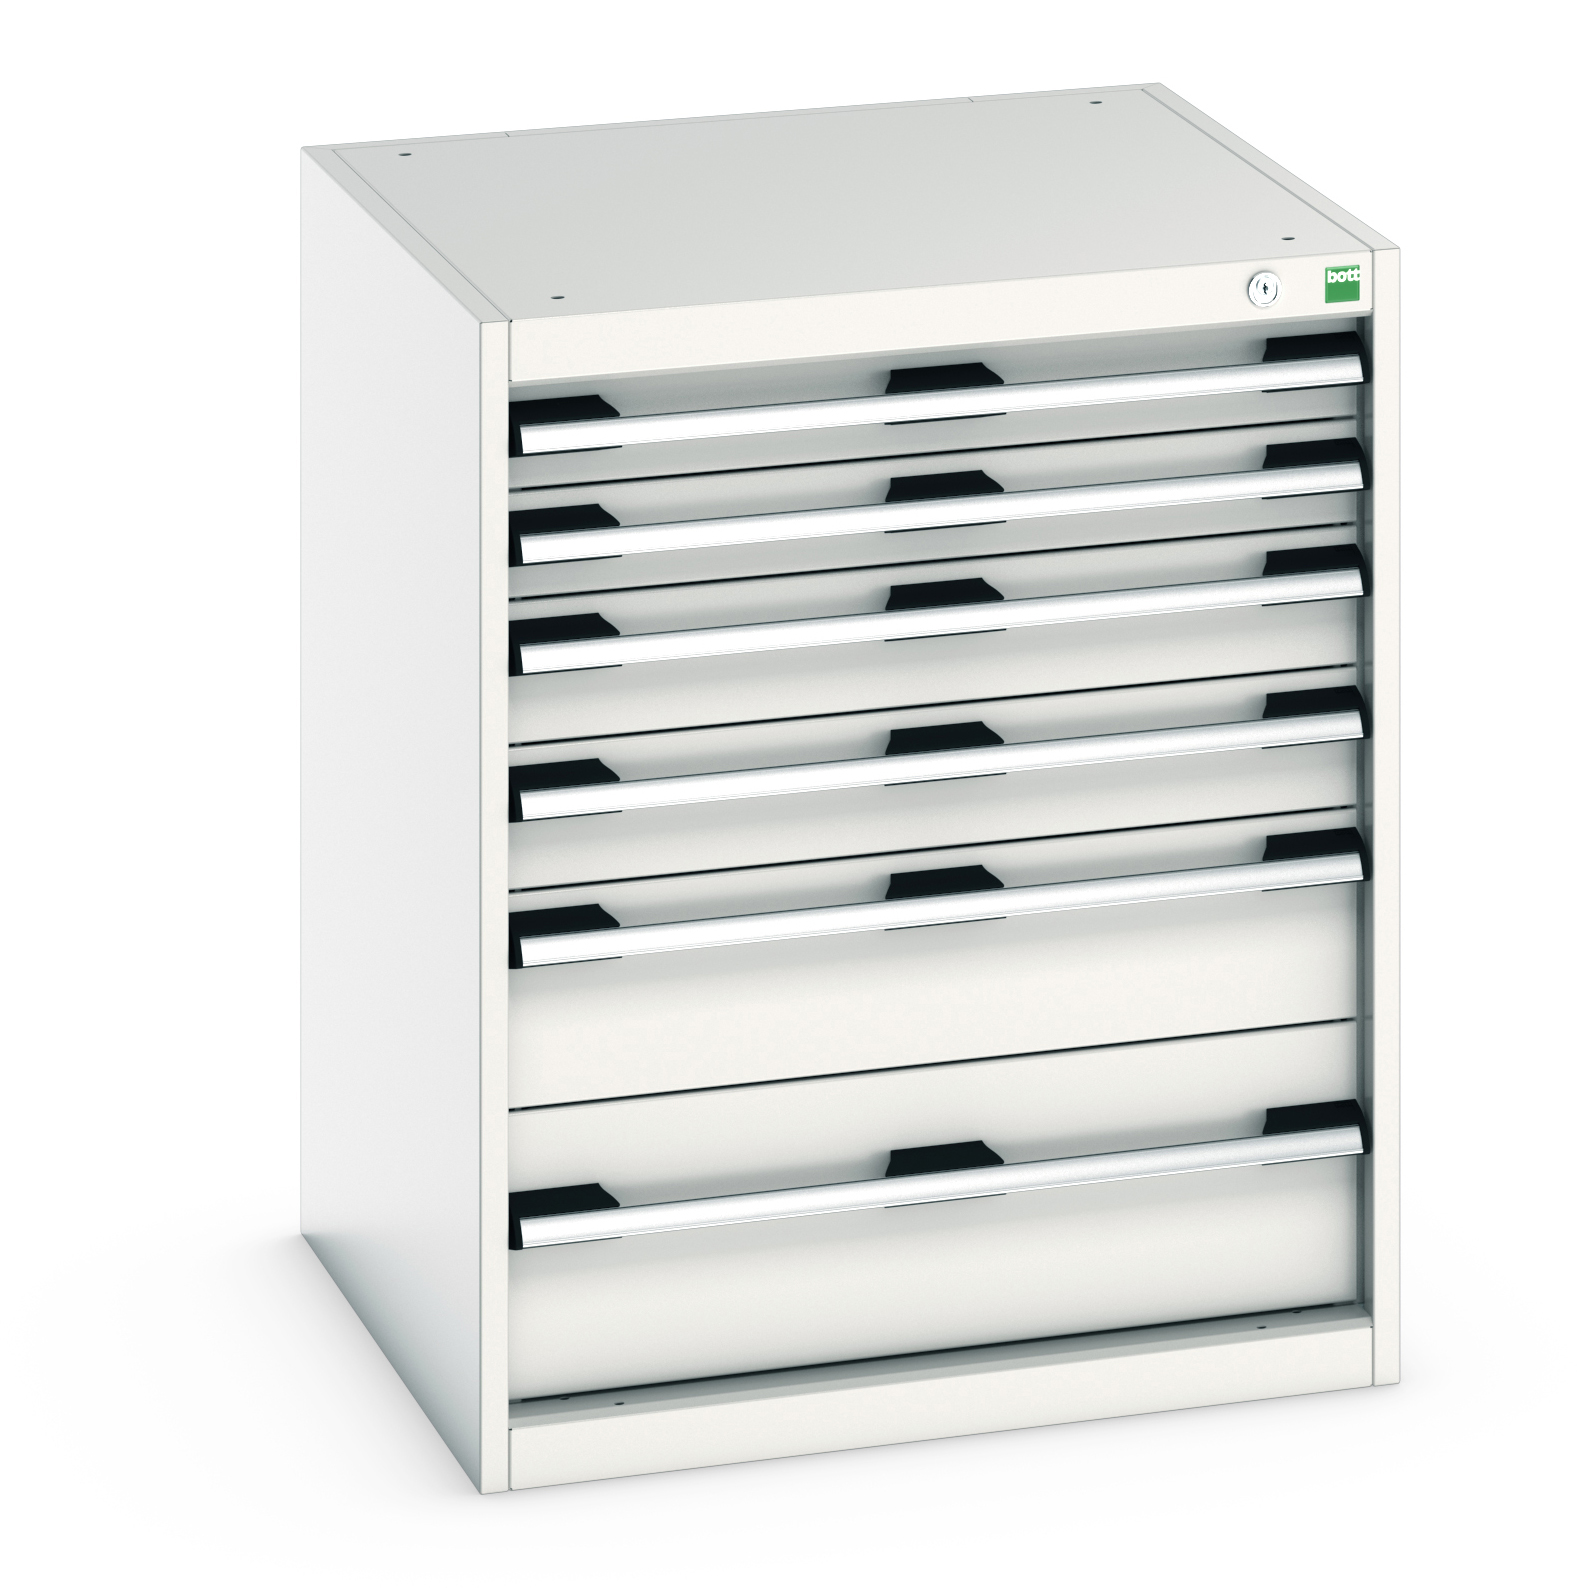 Bott Cubio Drawer Cabinet With 6 Drawers - 40019039.16V